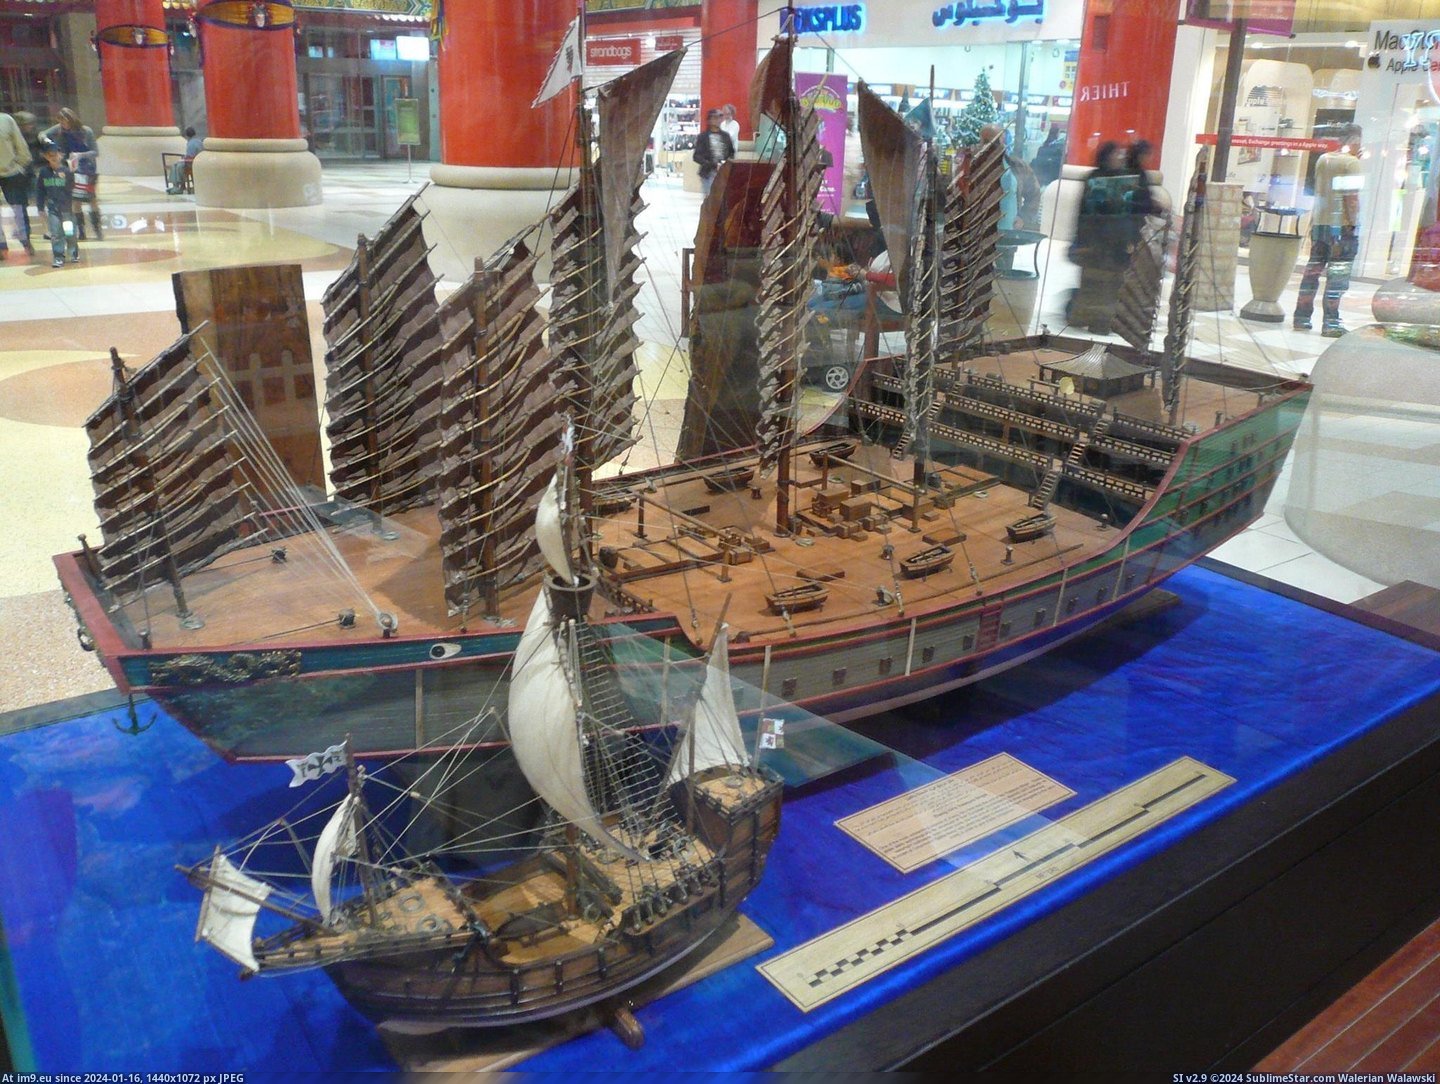 #Time #Santa #Chinese #Lived #Explorer #Christopher #Maria #Ship #Compared [Pics] Chinese explorer Zheng He's ship compared to Christopher Columbus' Santa Maria. Both lived and sailed at the same time. Pic. (Изображение из альбом My r/PICS favs))